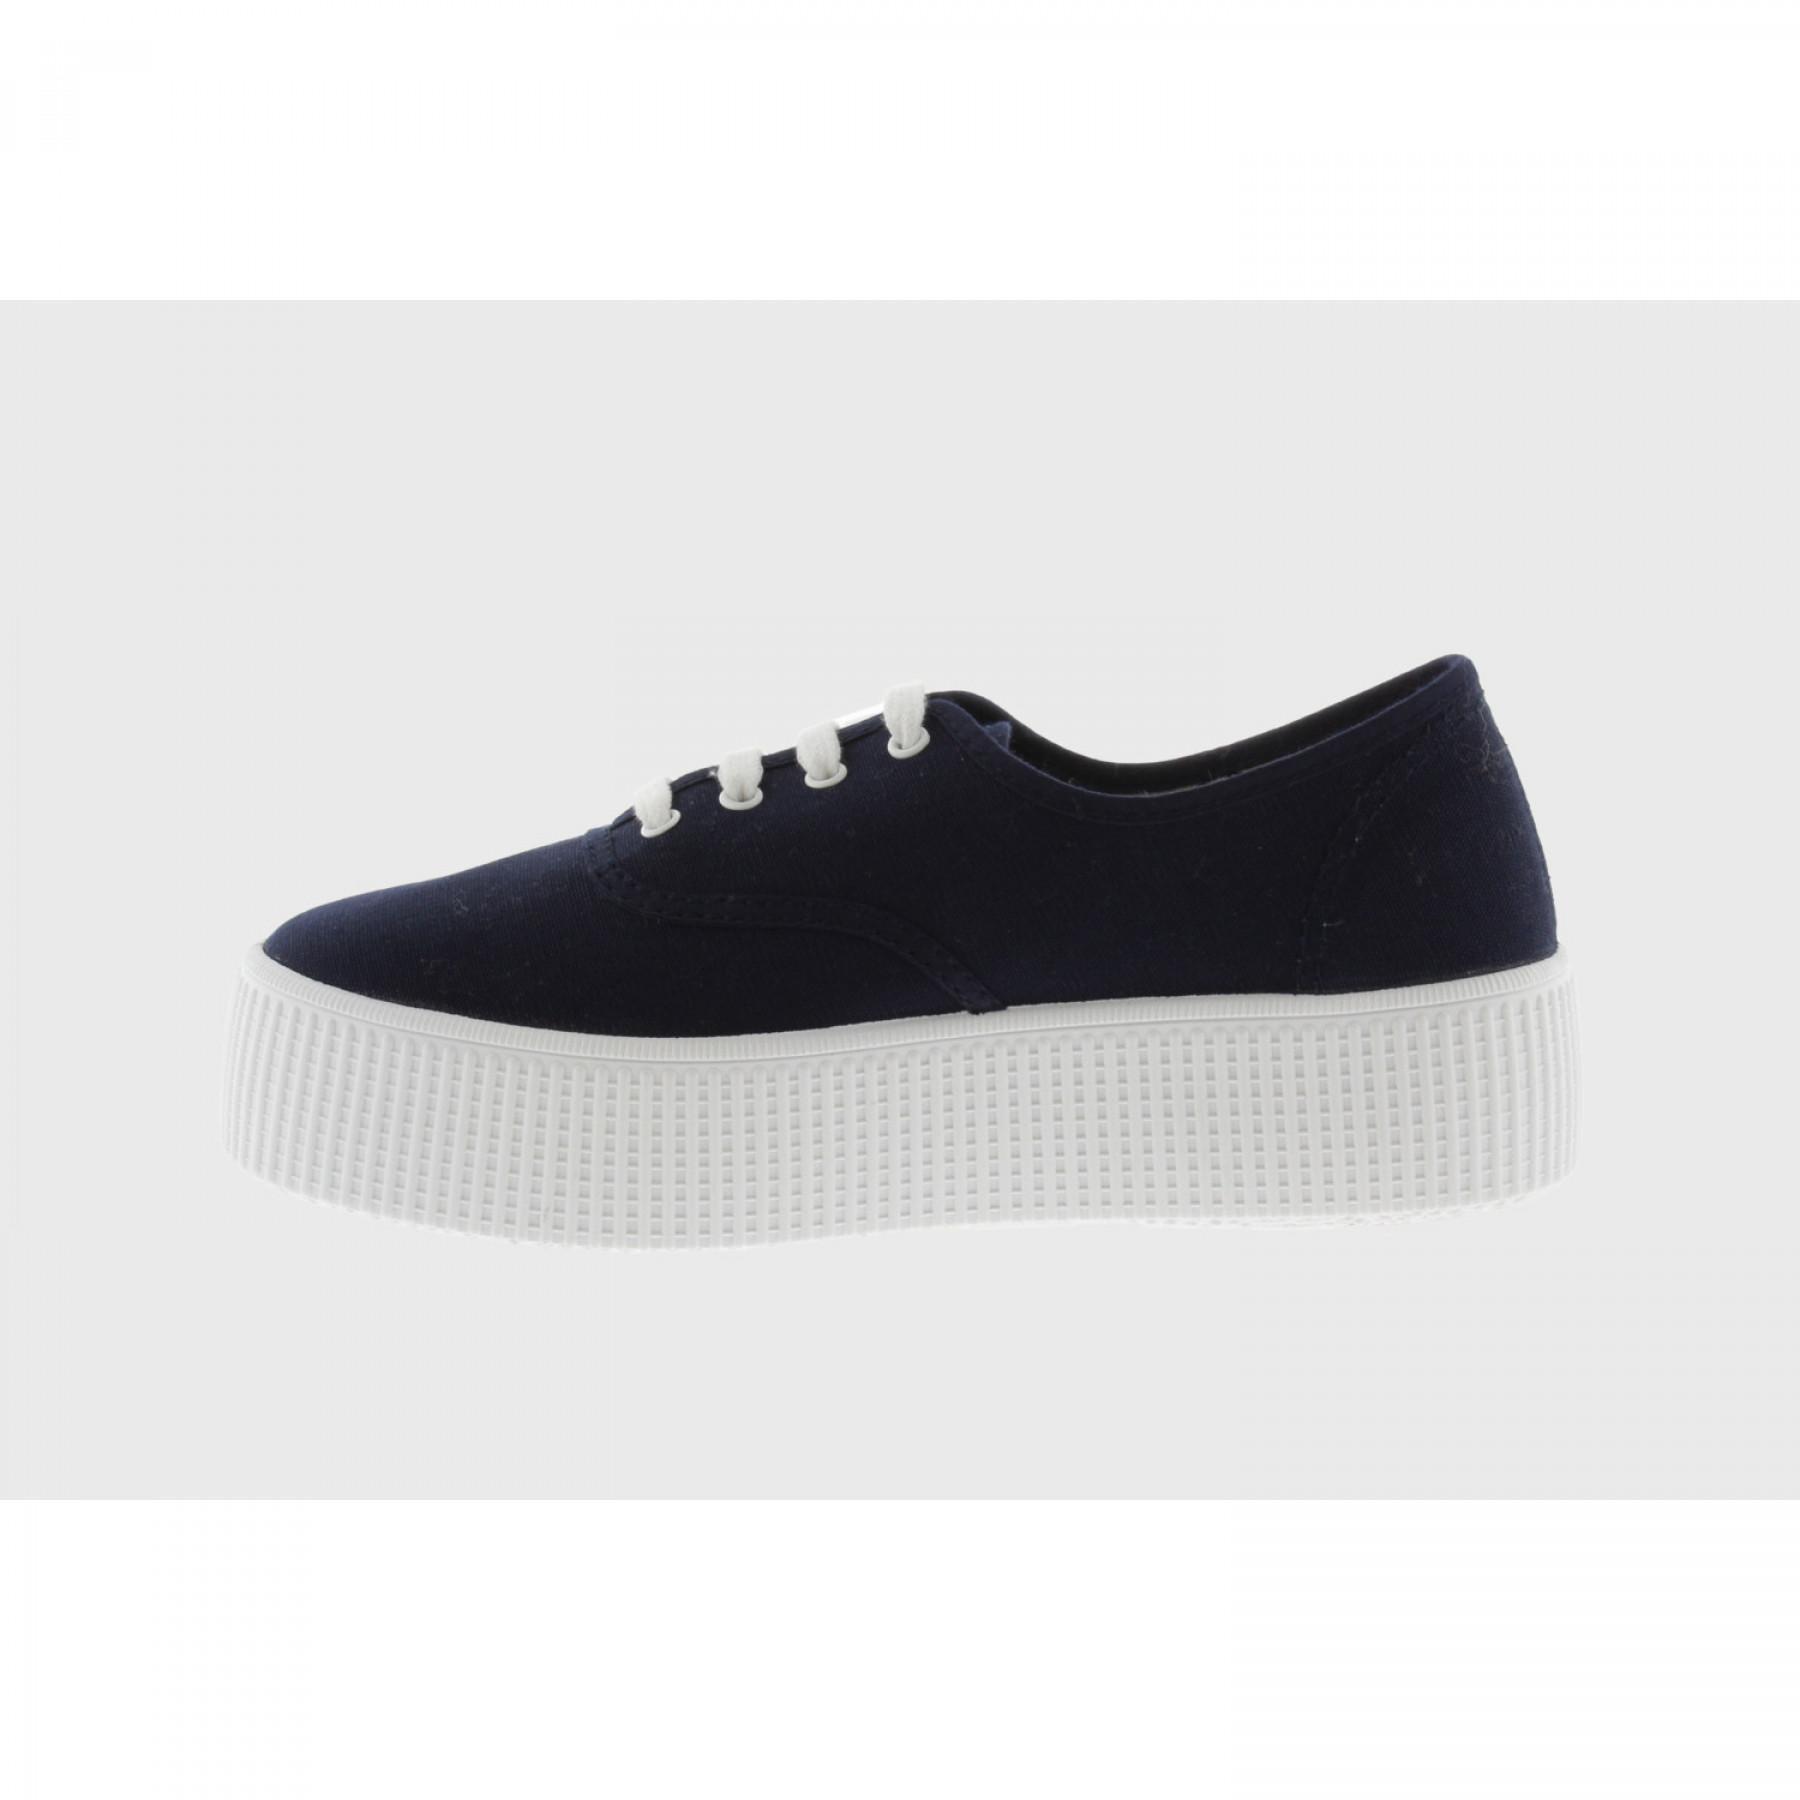 Sneakers Victoria anglaise double toile